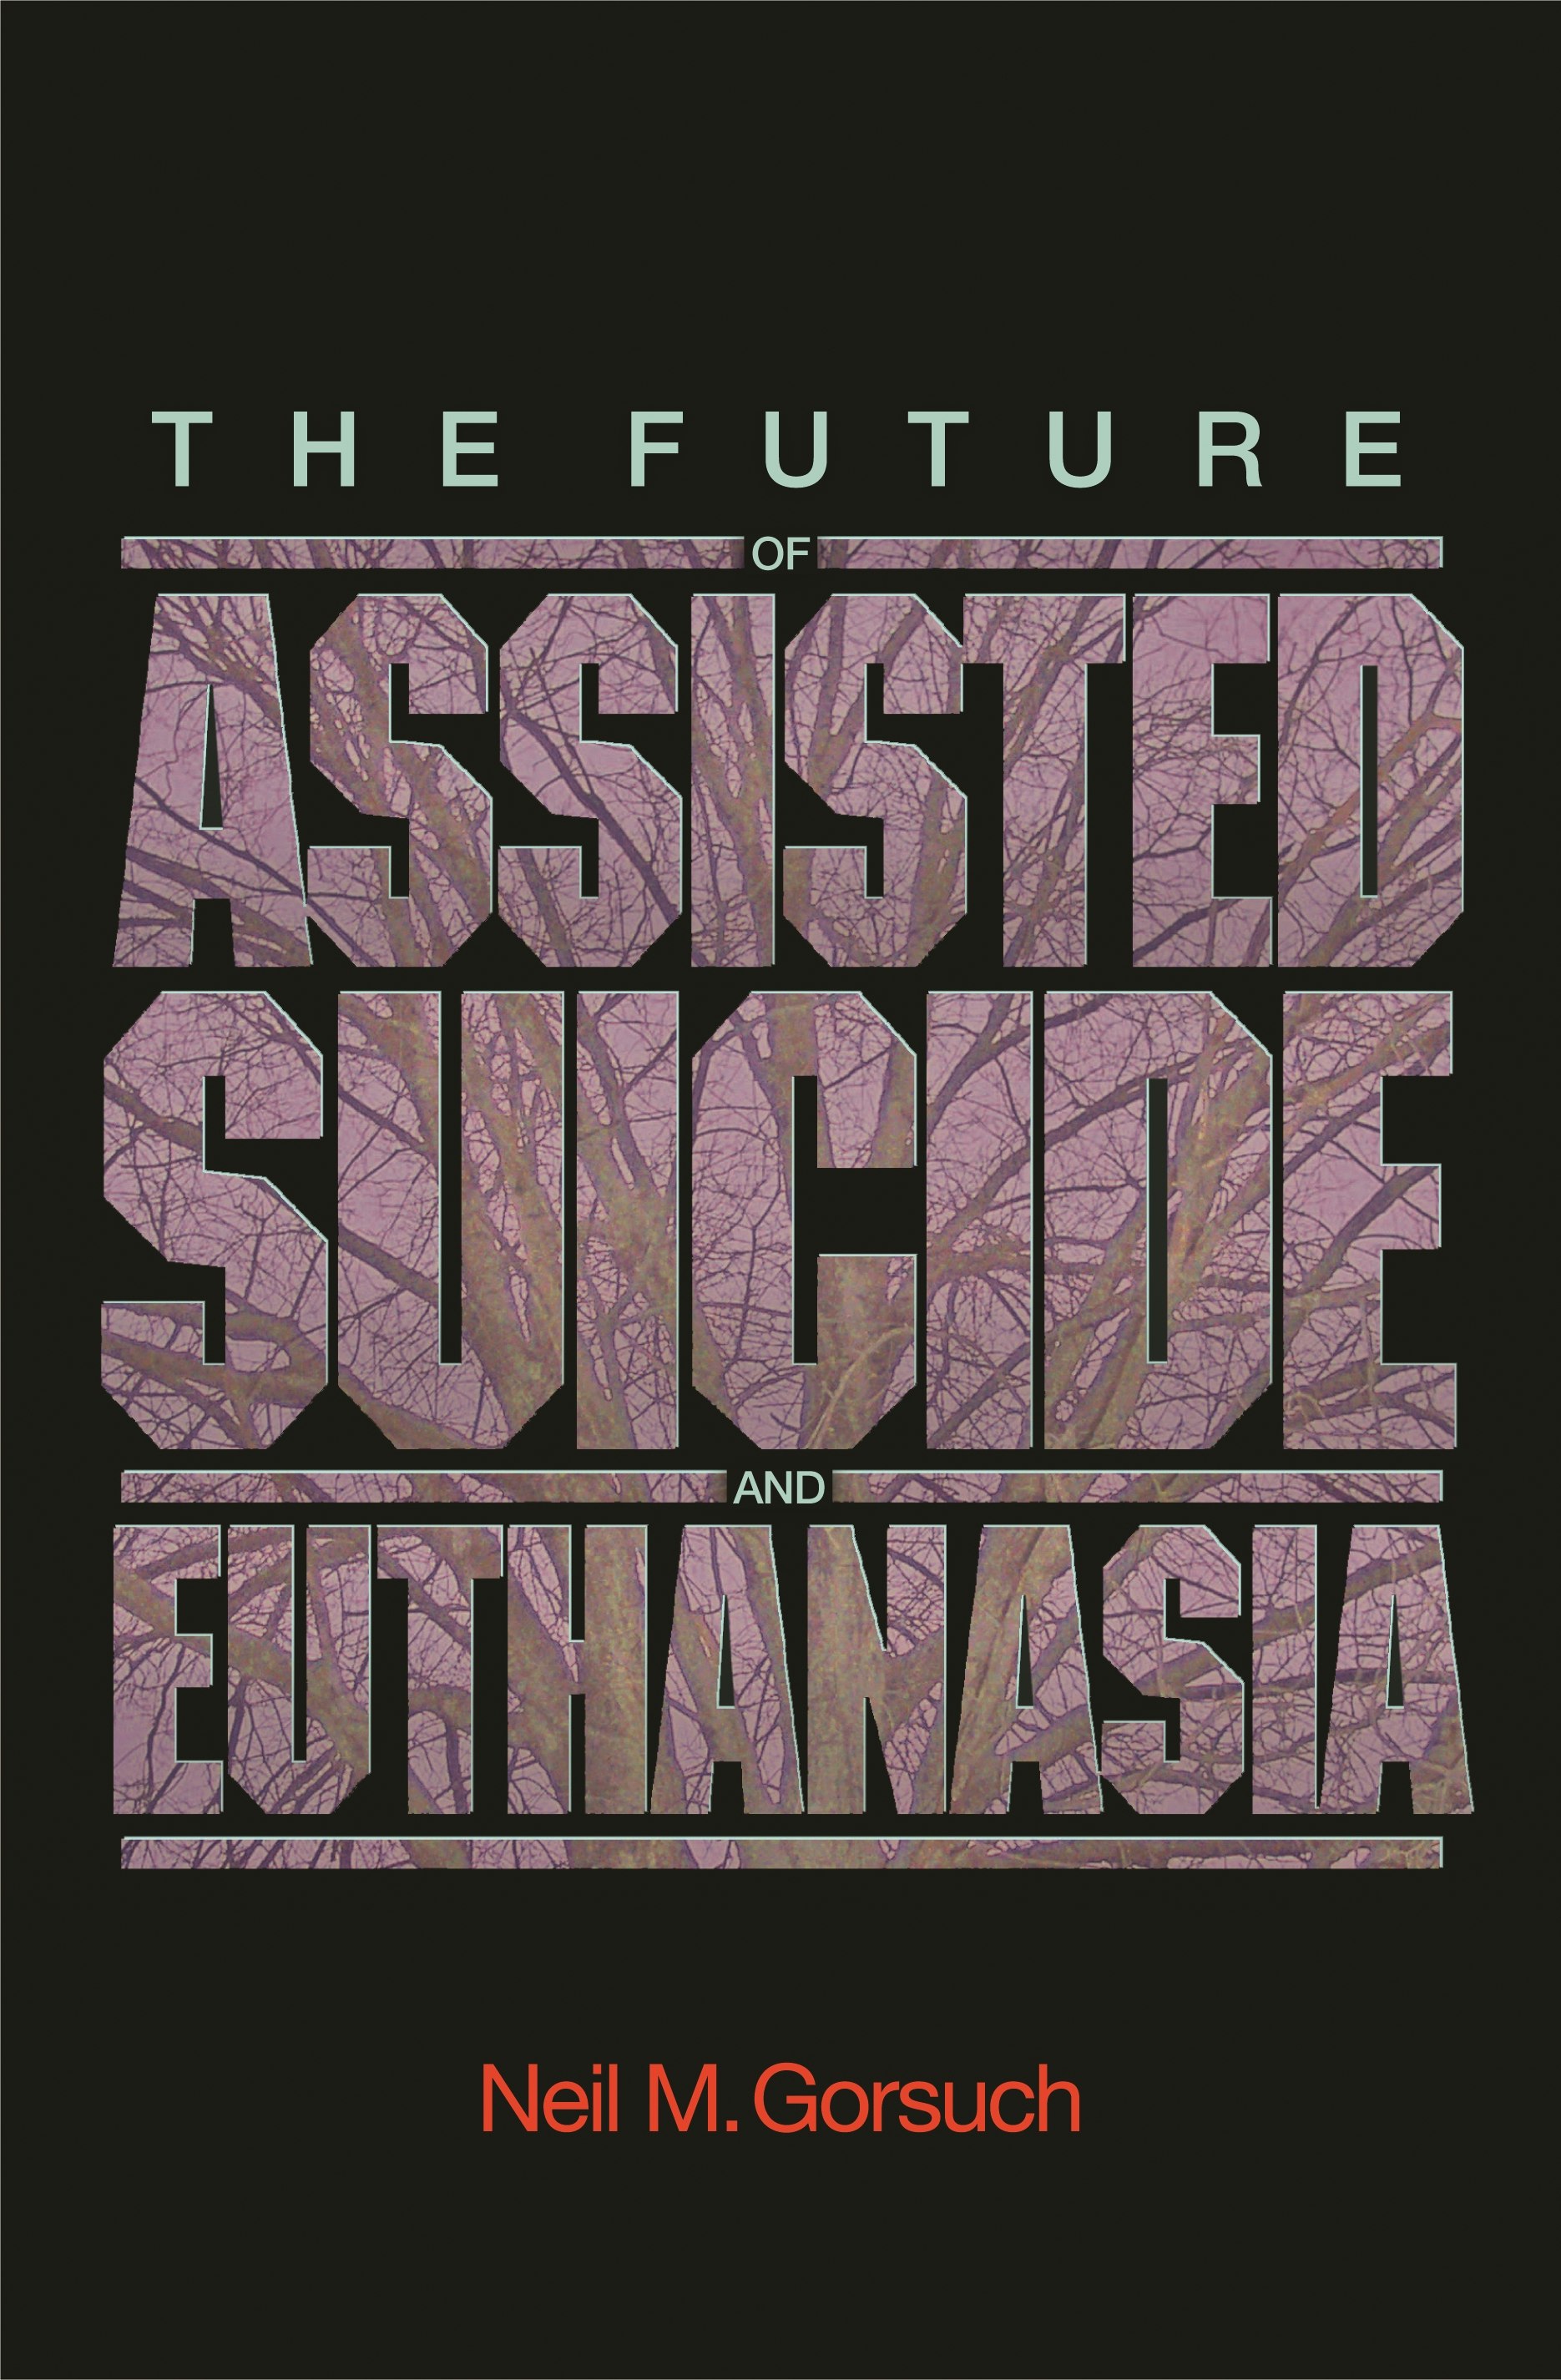 University　Princeton　Euthanasia　Assisted　and　Suicide　of　Future　The　Press